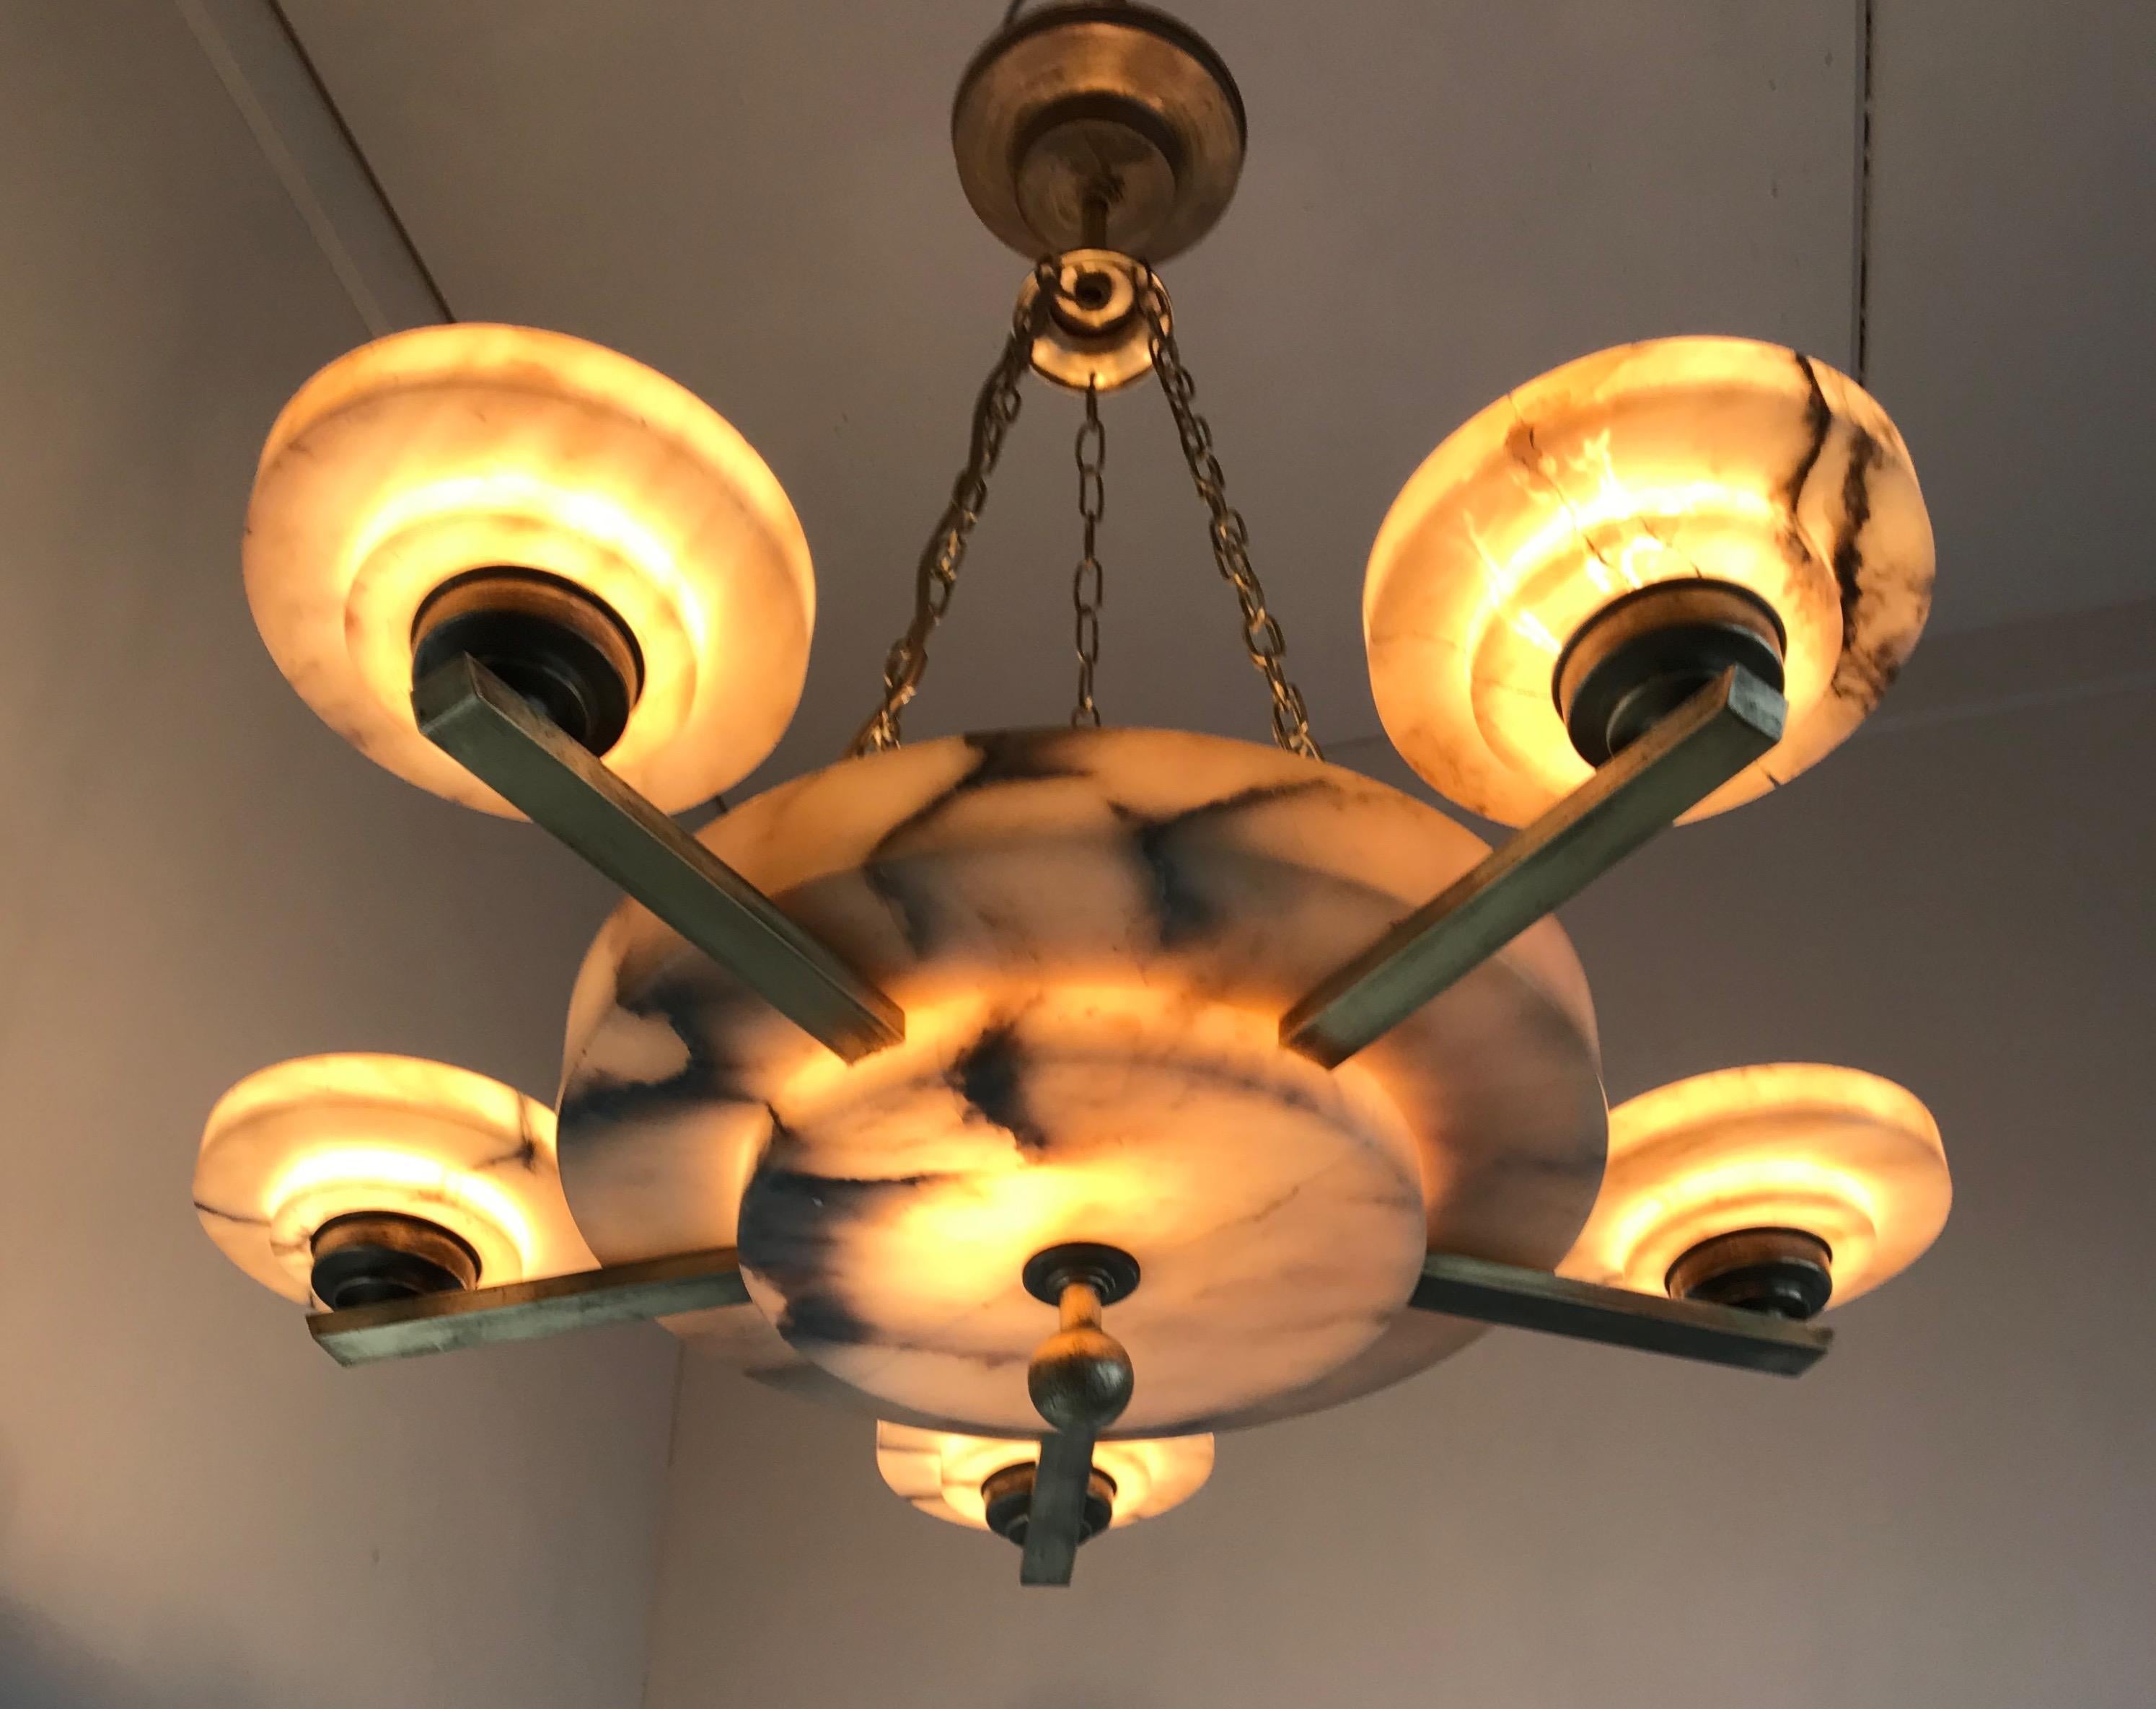 Top quality Art Deco pendant light with a great shape and color.
 
This early 20th century, alabaster pendant with its rare angular design is in original and good condition. The circular yet sleek shape of the shades, the color and the effect of the